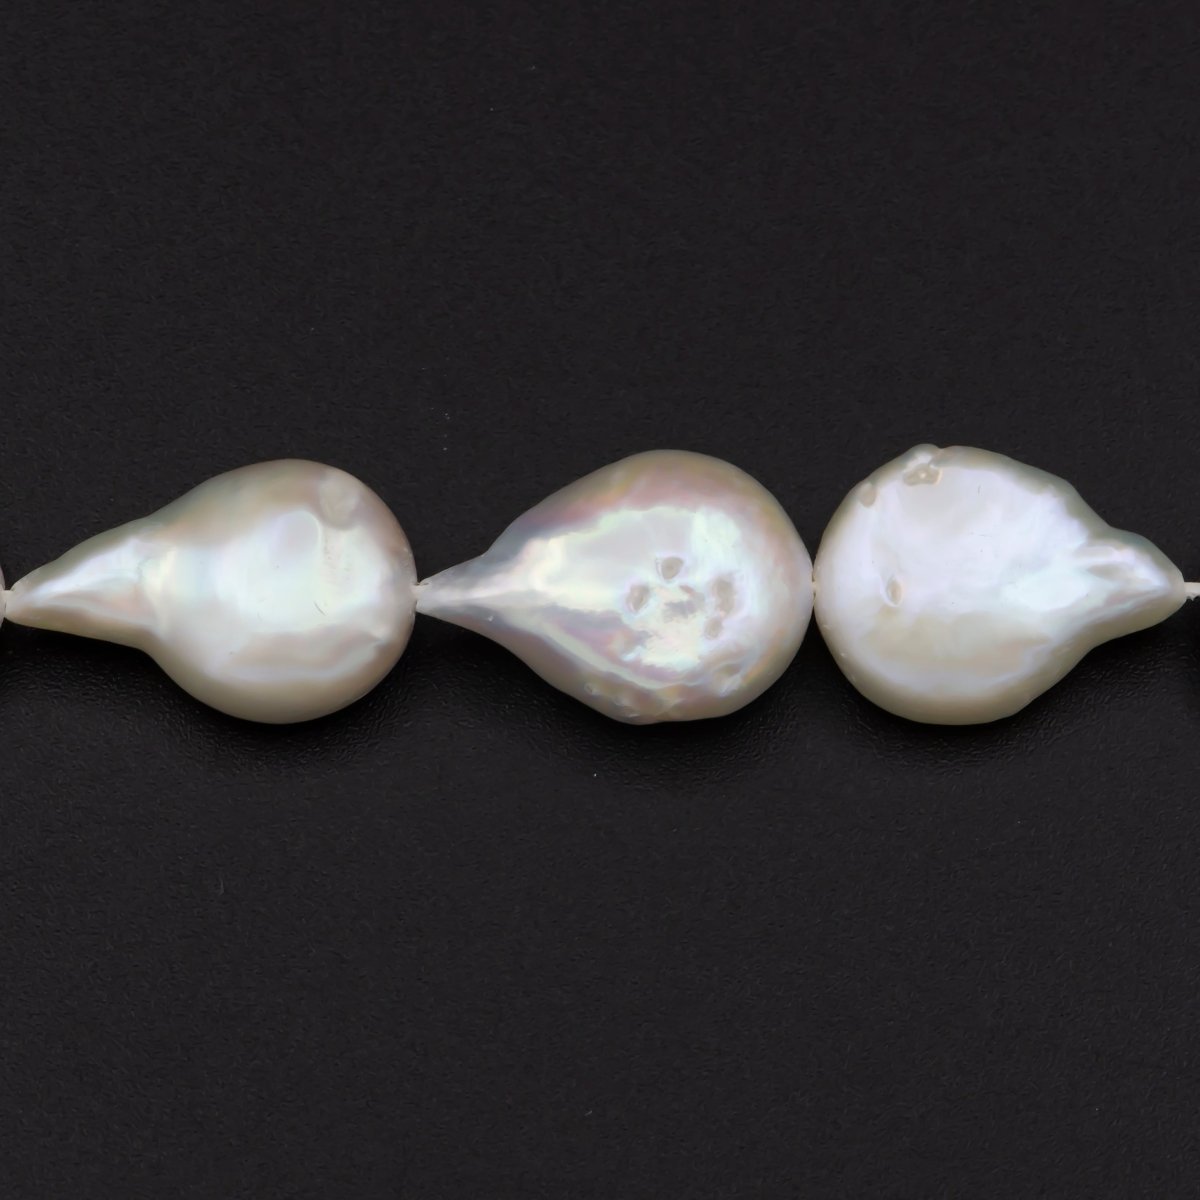 9.5-13.2mm Genuine Natural Freshwater baroque pearl Beads, Big Size Irregular Keishi pearl beads, Bridesmaid Wedding Pearls Necklace | WA-582 Clearance Pricing - DLUXCA